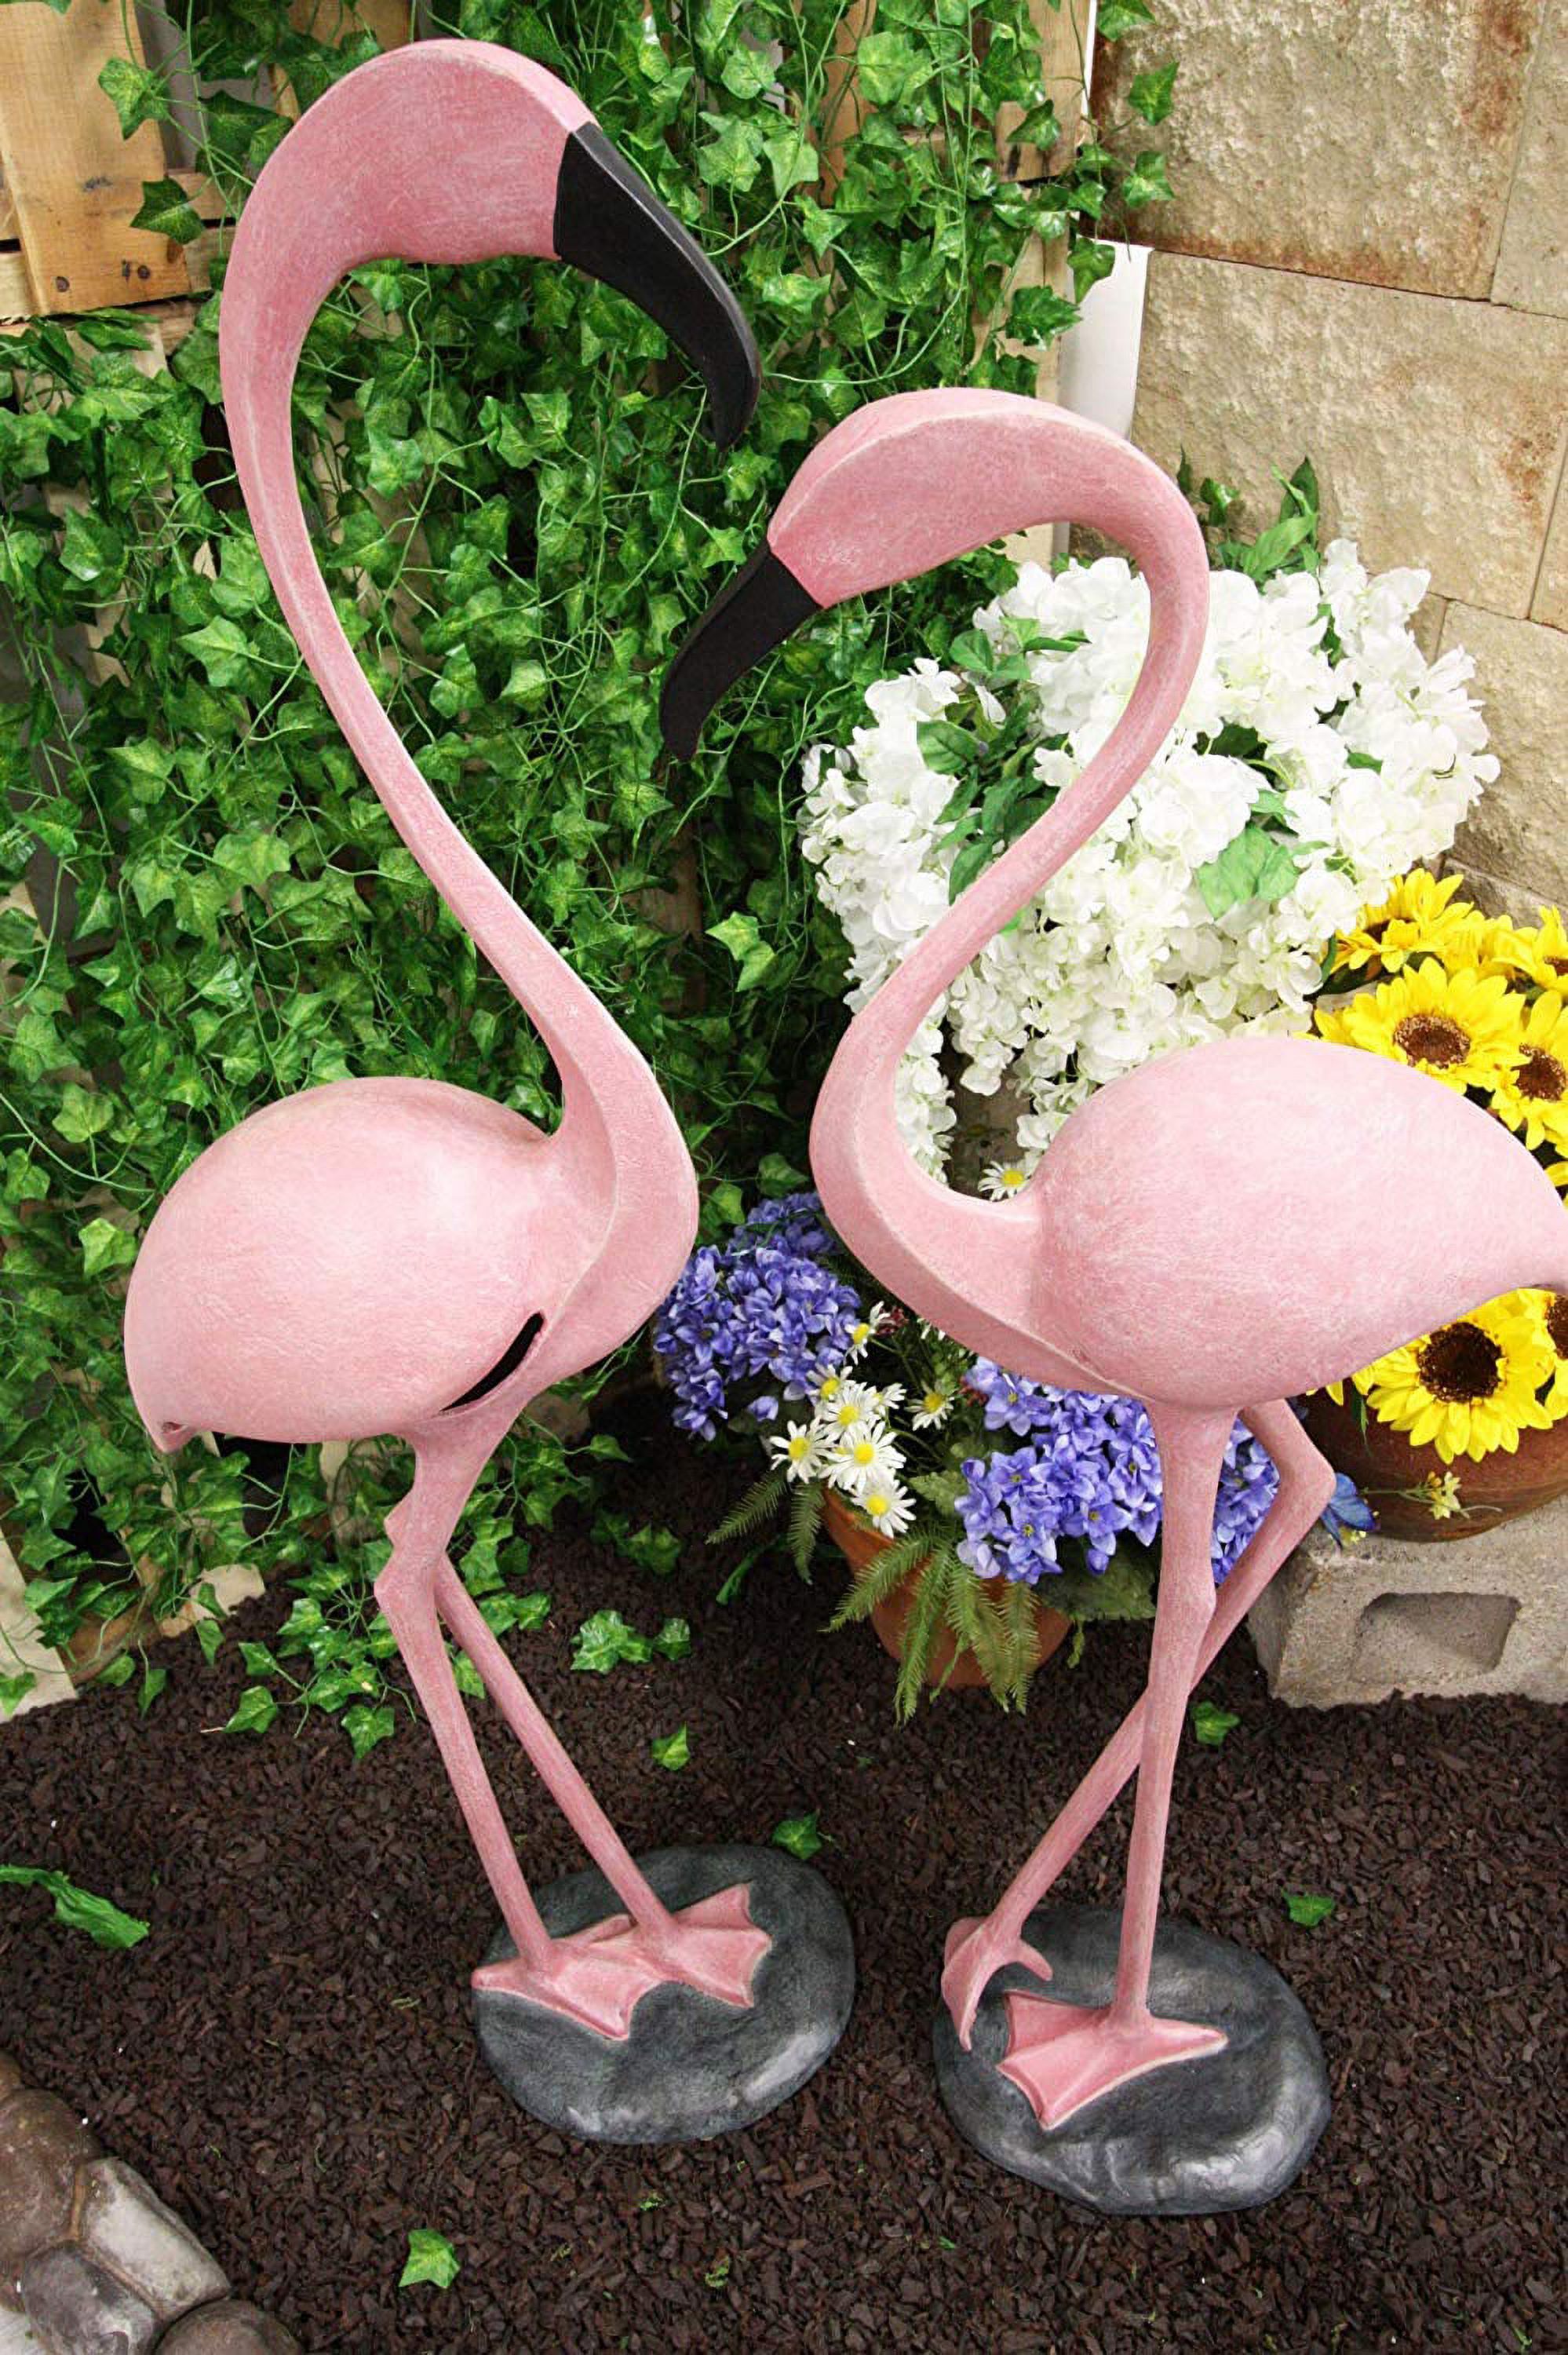 Ebros Large Set of 2 Colorful Tropical Rainforest Pink Flamingo Garden Statues - image 2 of 6